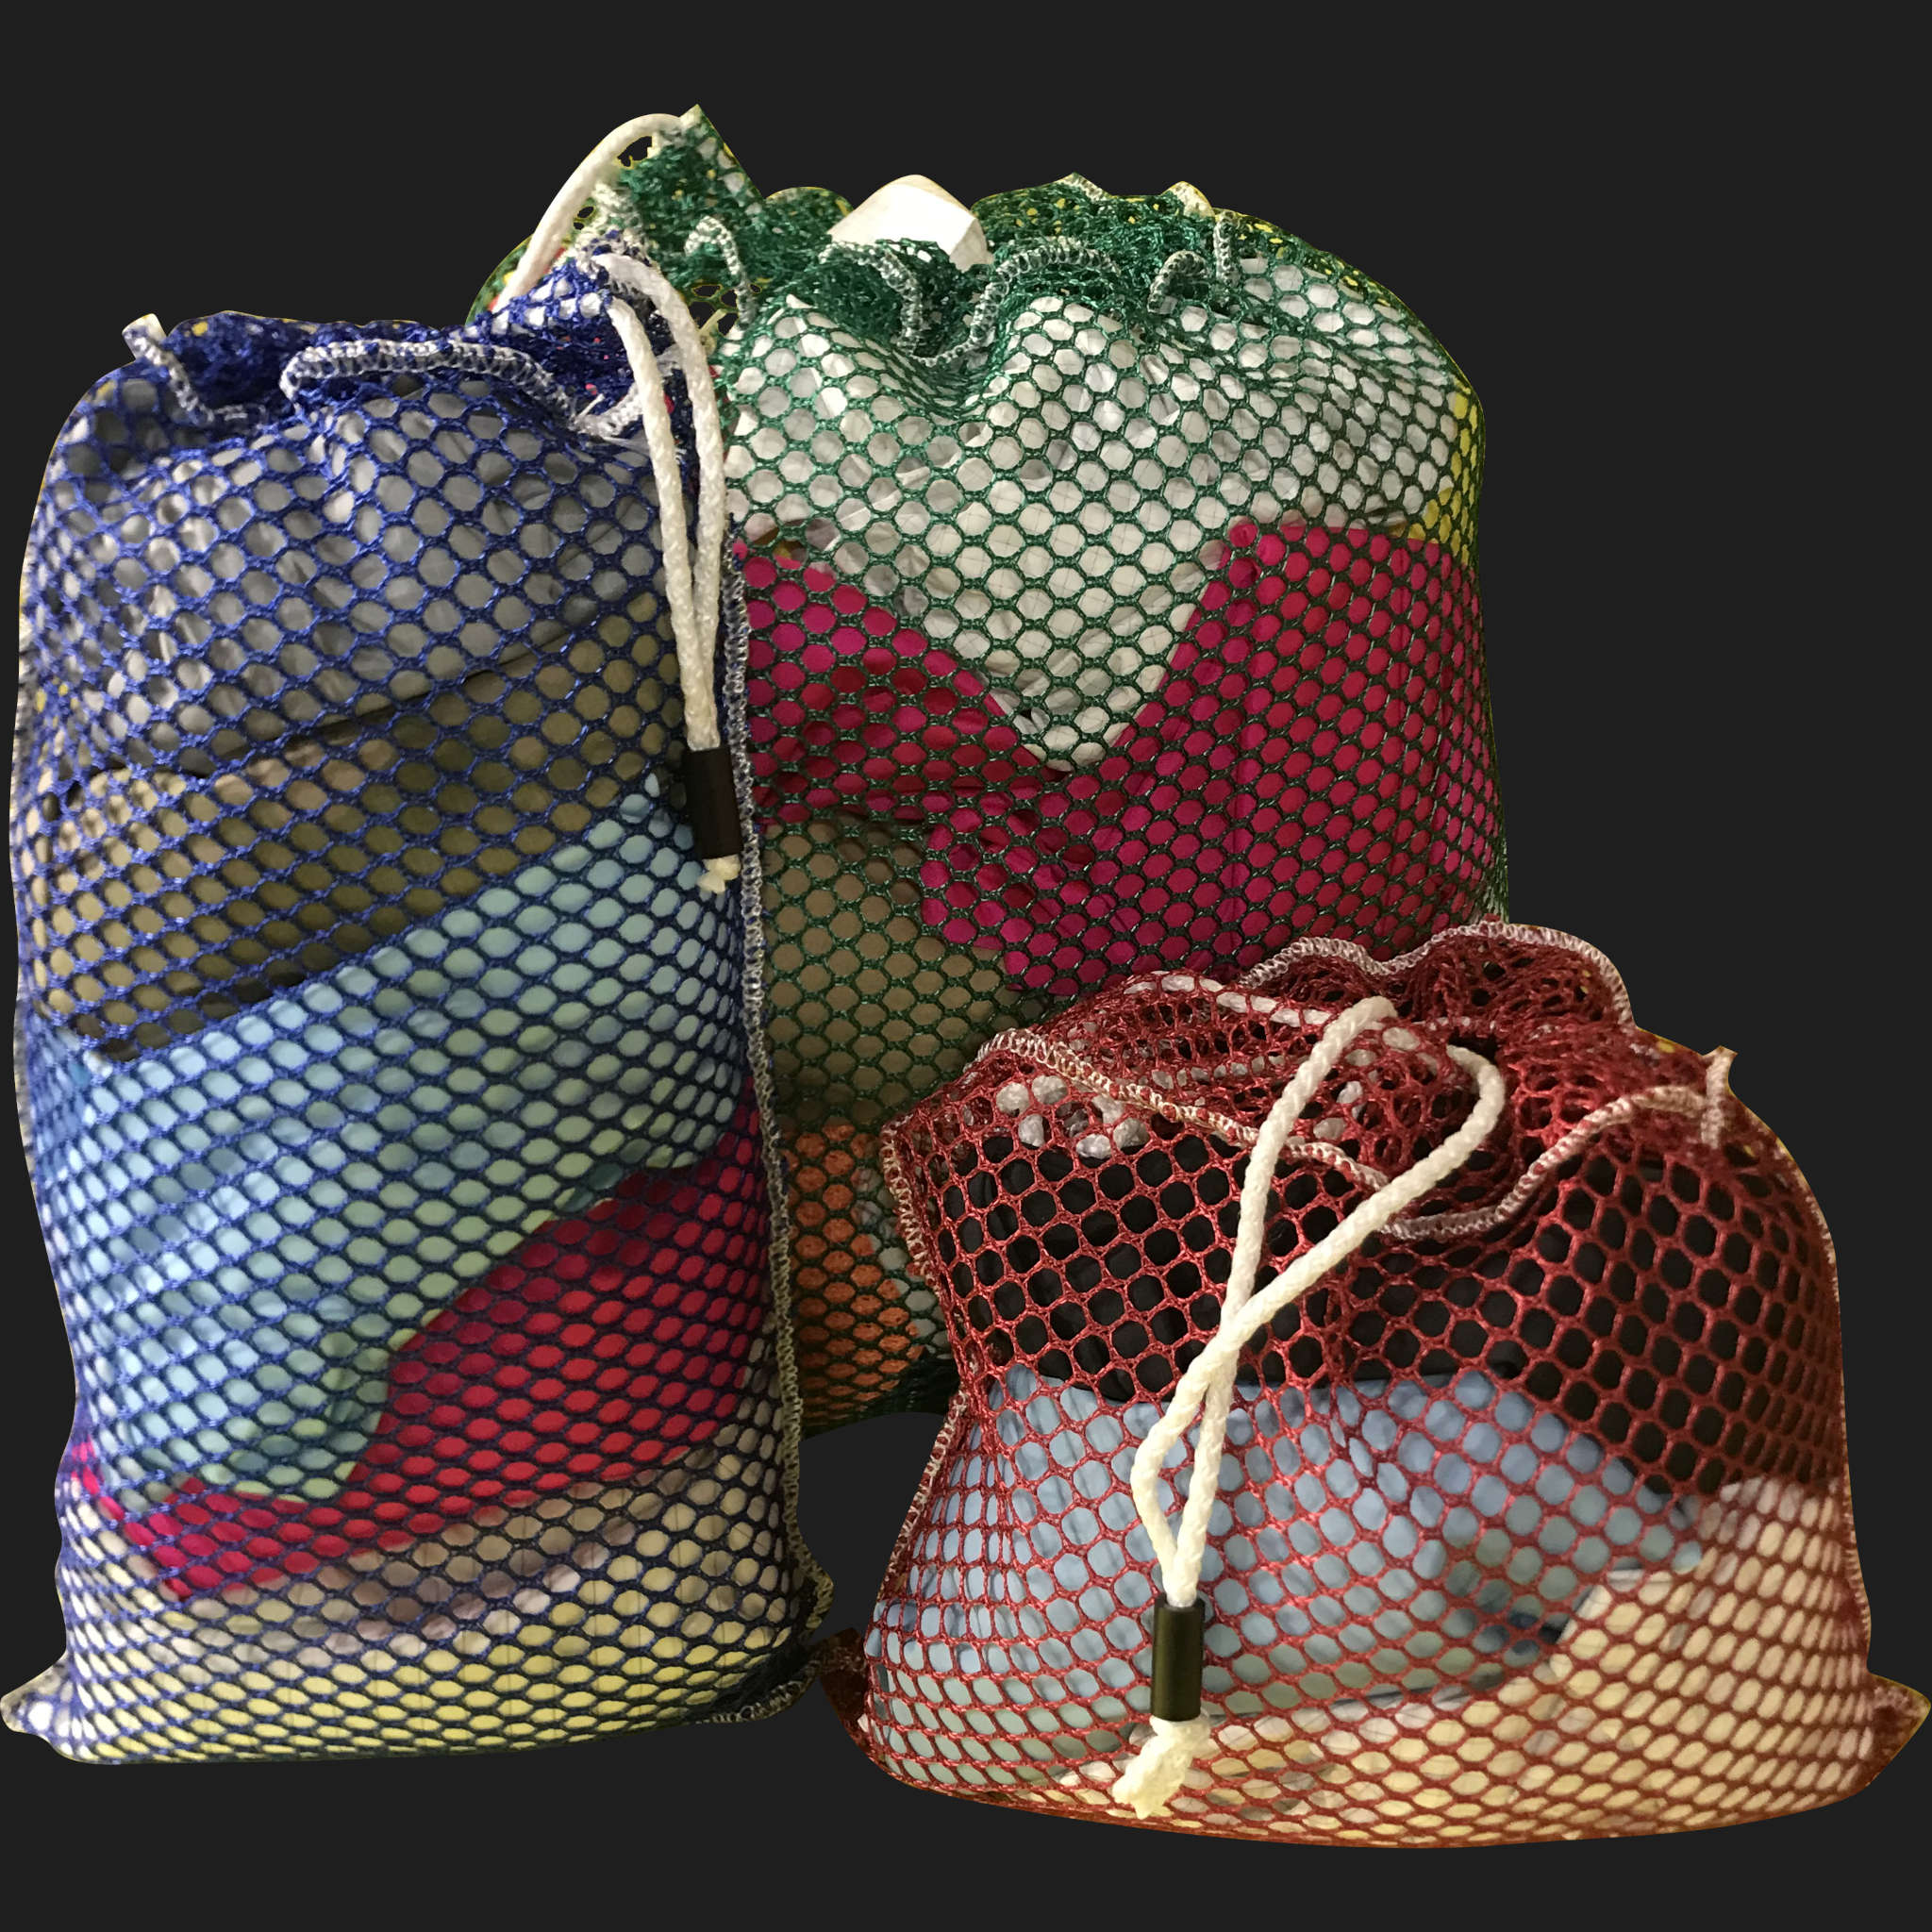 32" x 56" Customized Mesh-Net-Laundry Bags Heavy Duty with Cord and barrellock closure